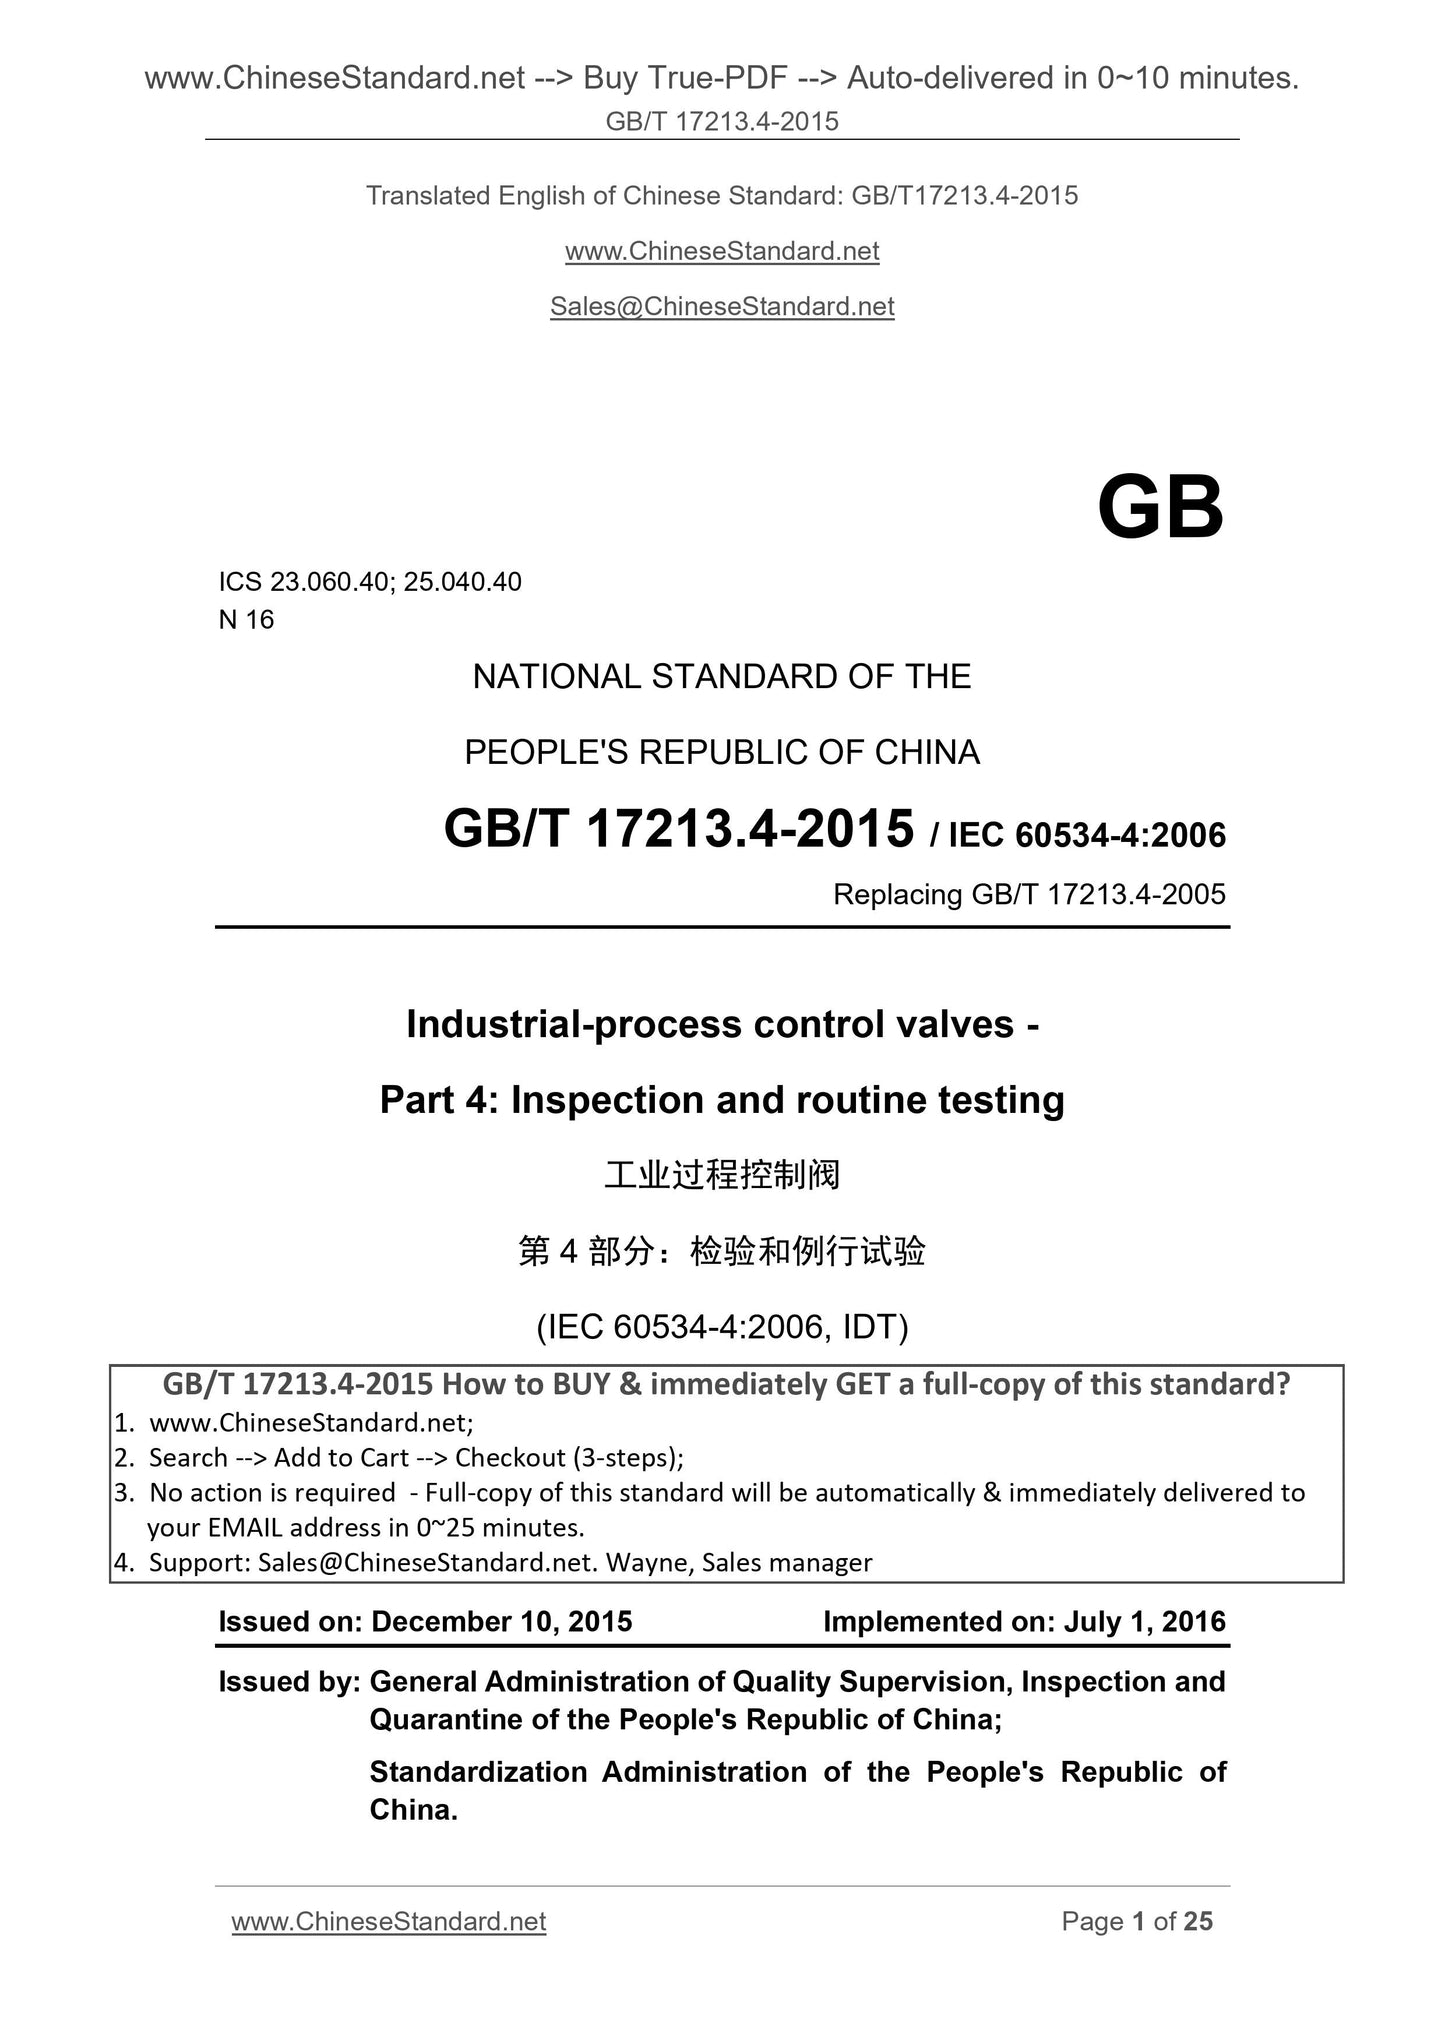 GB/T 17213.4-2015 Page 1